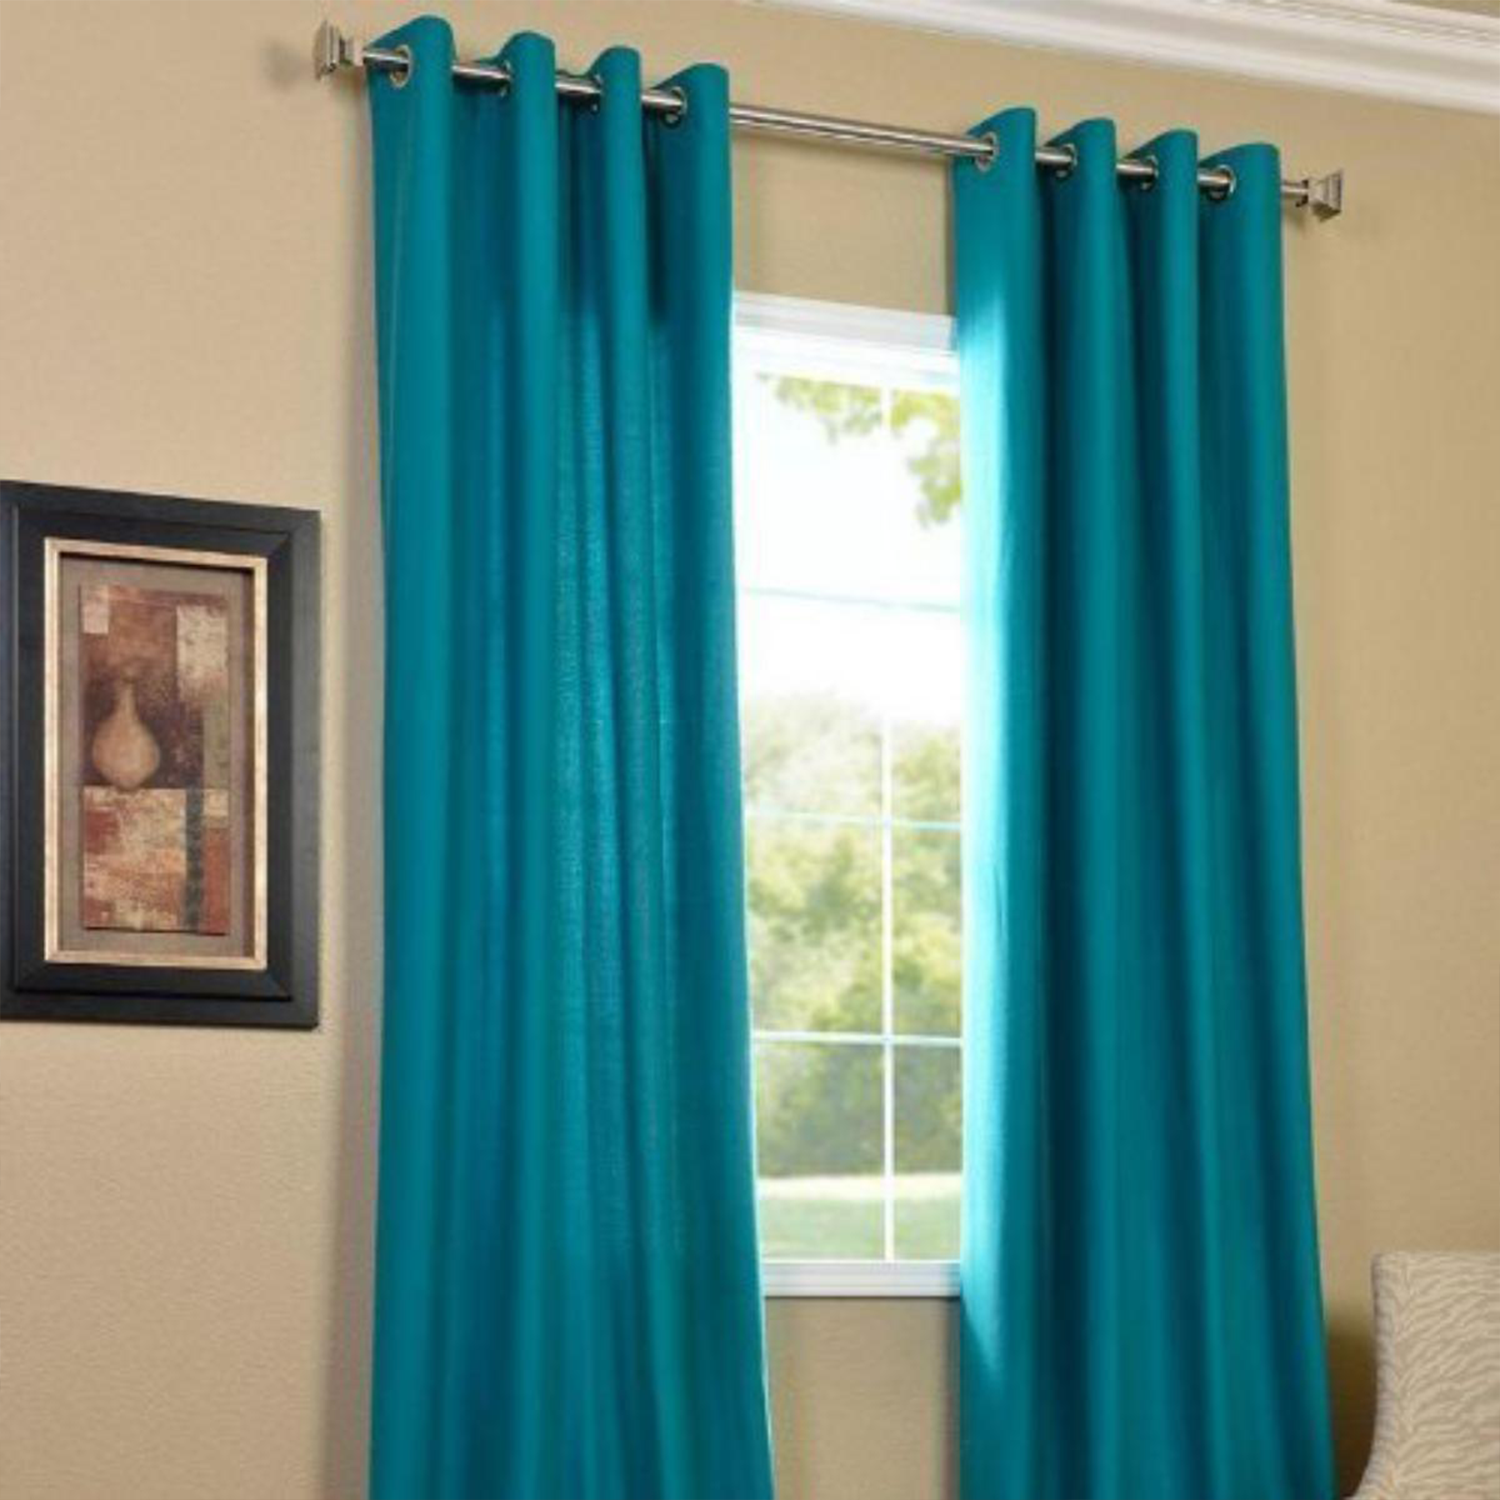 IndianOnlineMall Plain Polyester Crush Curtain(4x7ft)